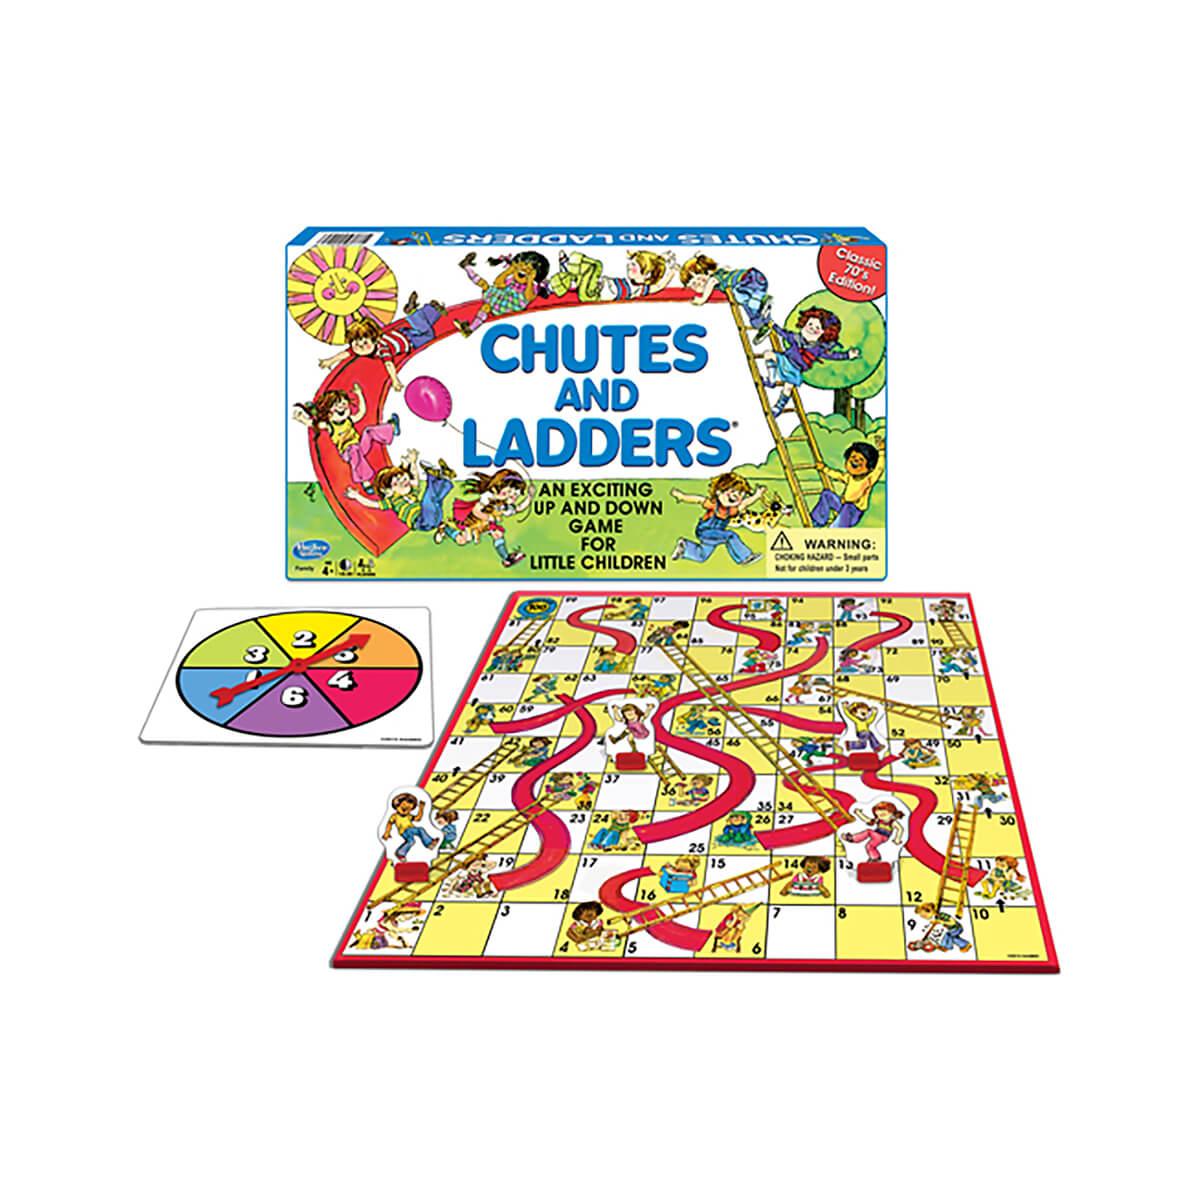  Chutes And Ladders Classic Game